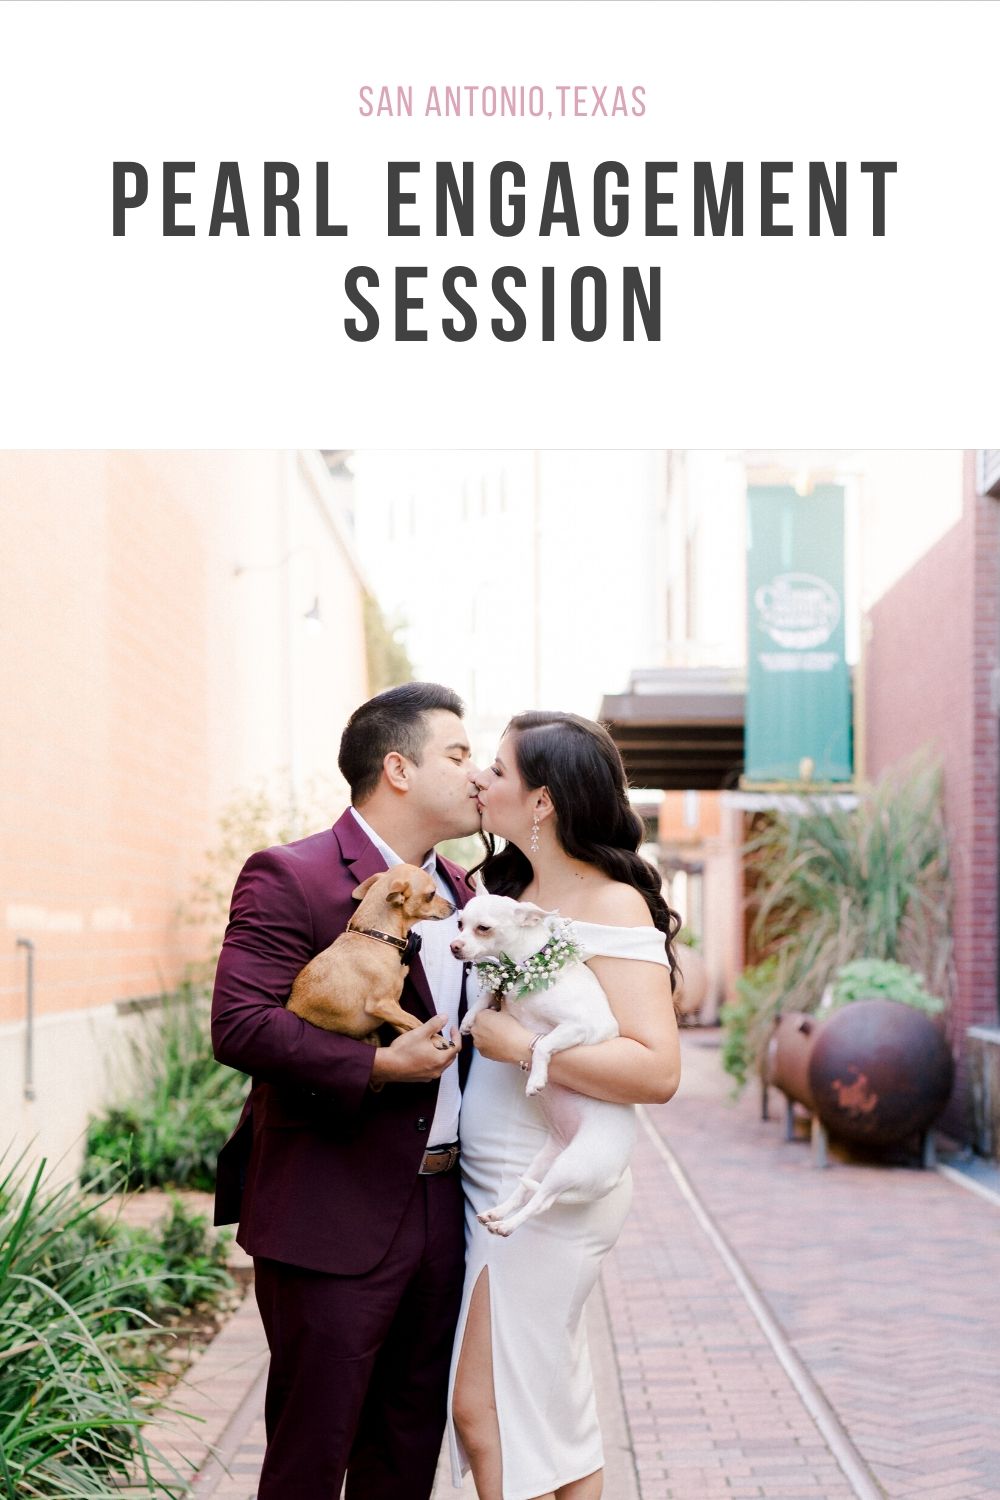 San Antonio Pearl Engagement Session with Cute Puppies and Glam Outfits, Anna Kay Photography